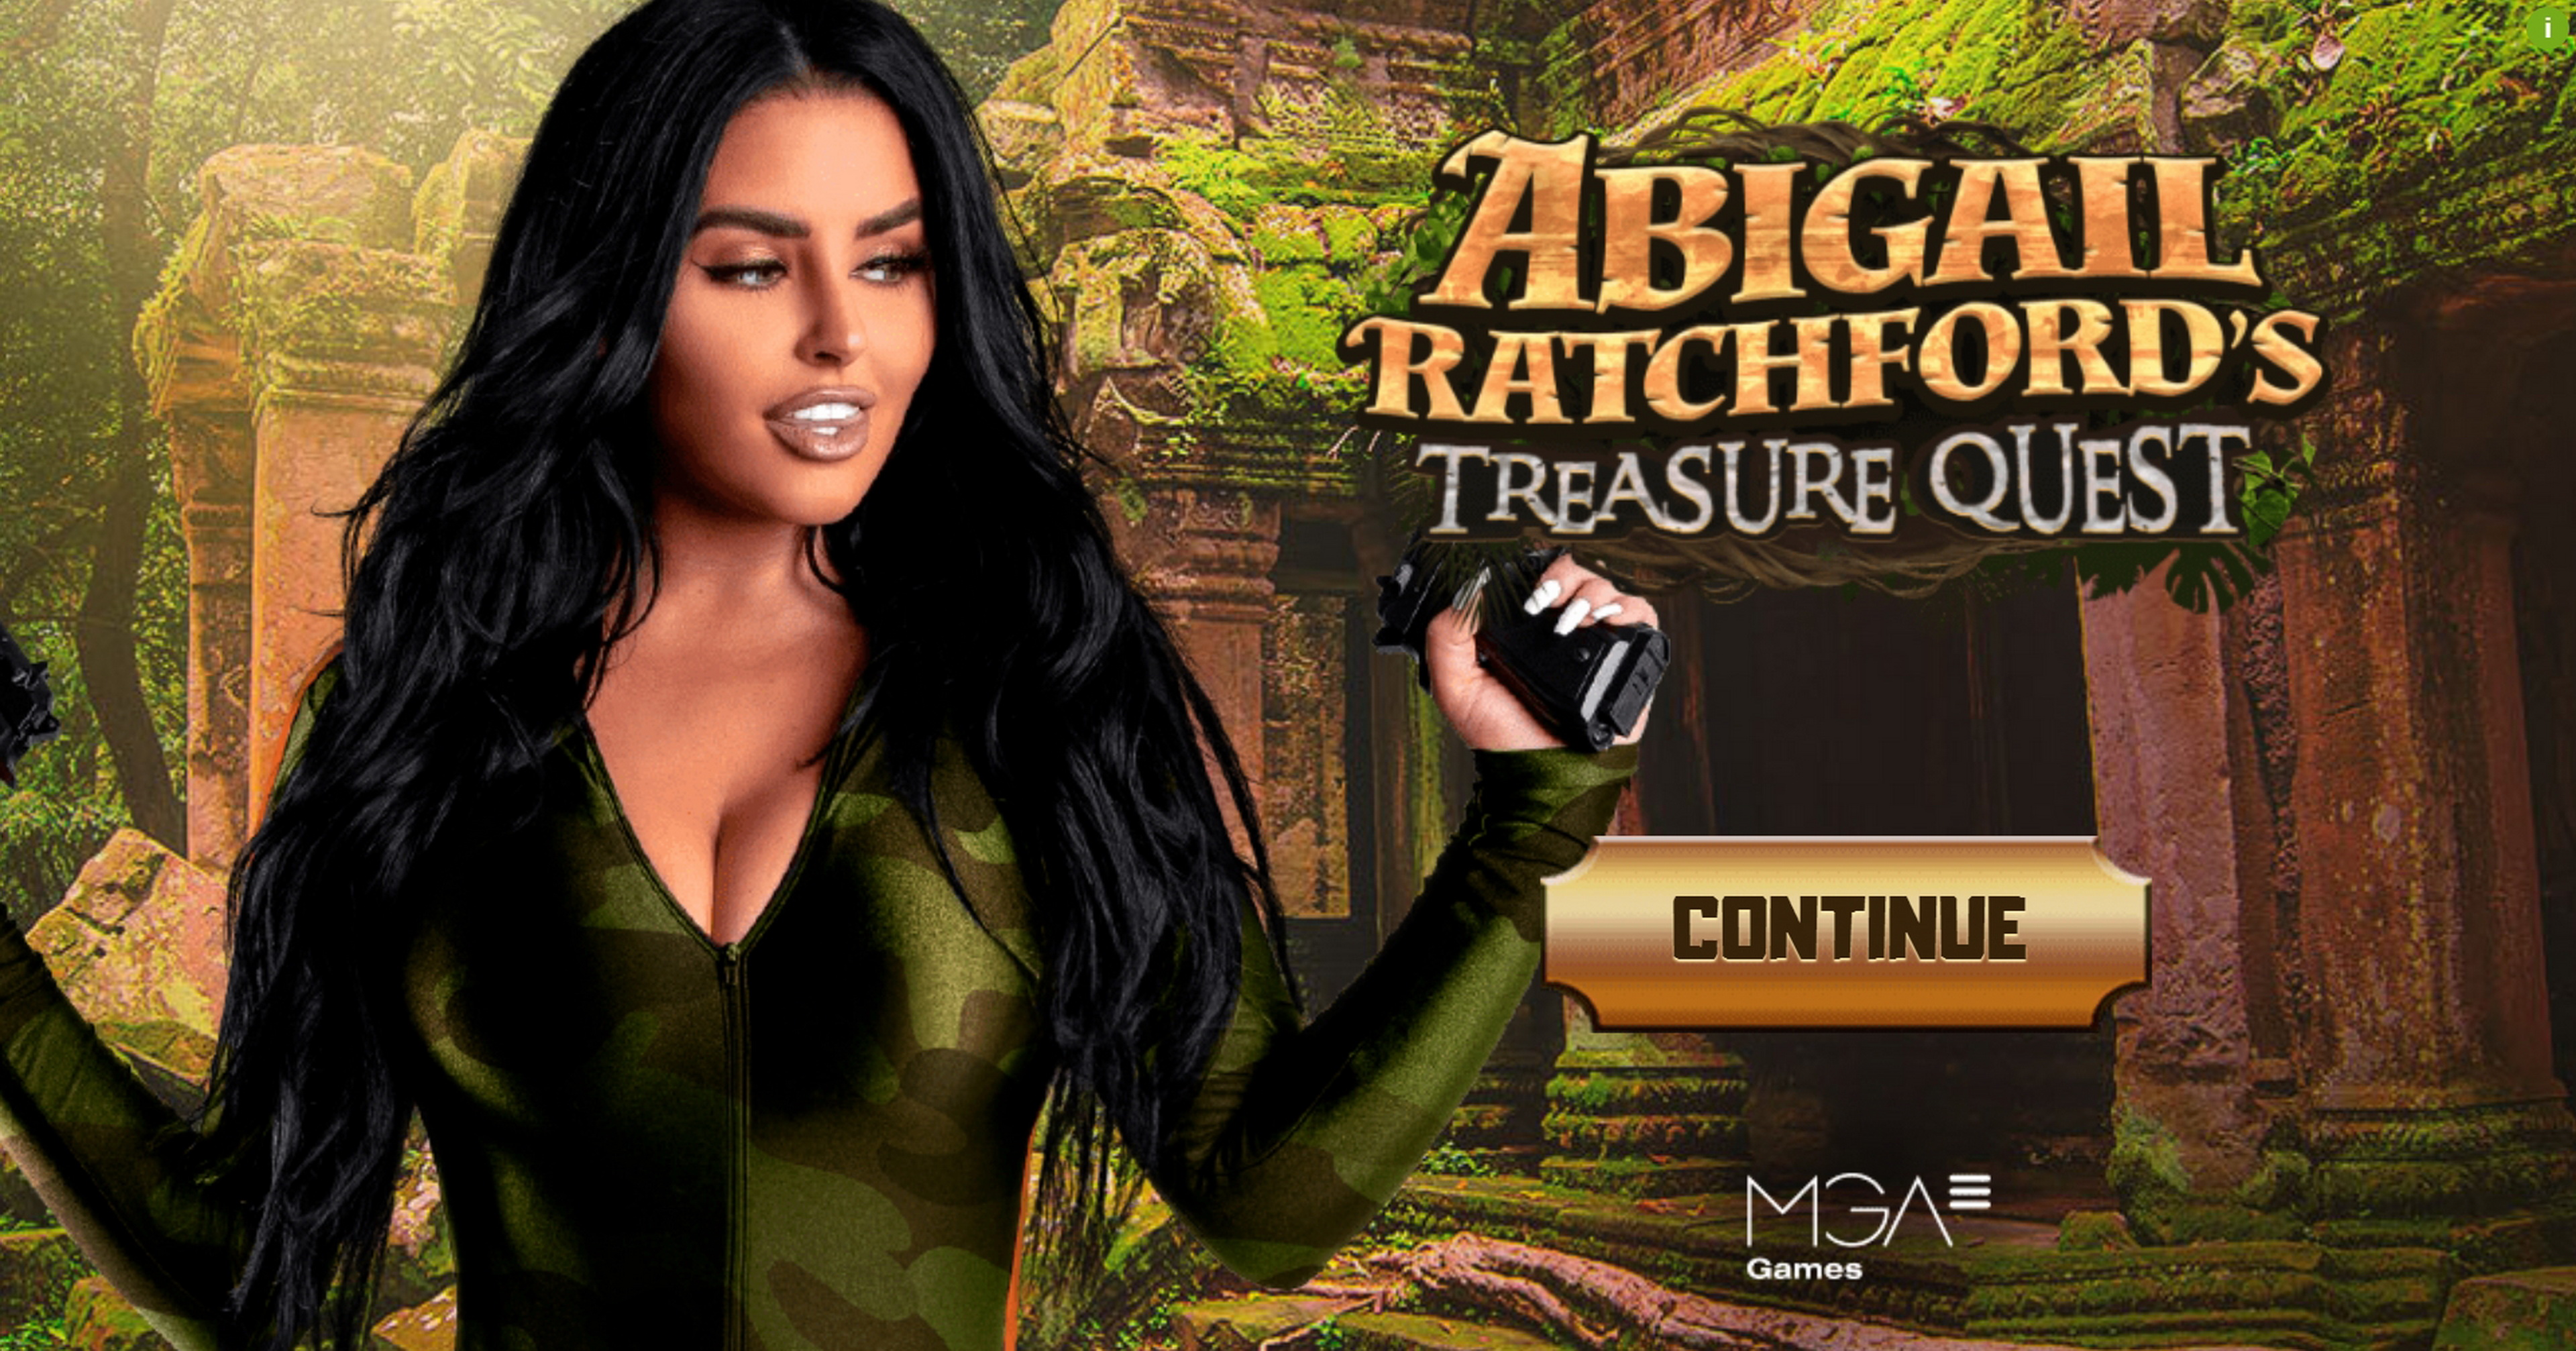 Play Abigail Ratchfords Treasure Quest Free Casino Slot Game by MGA